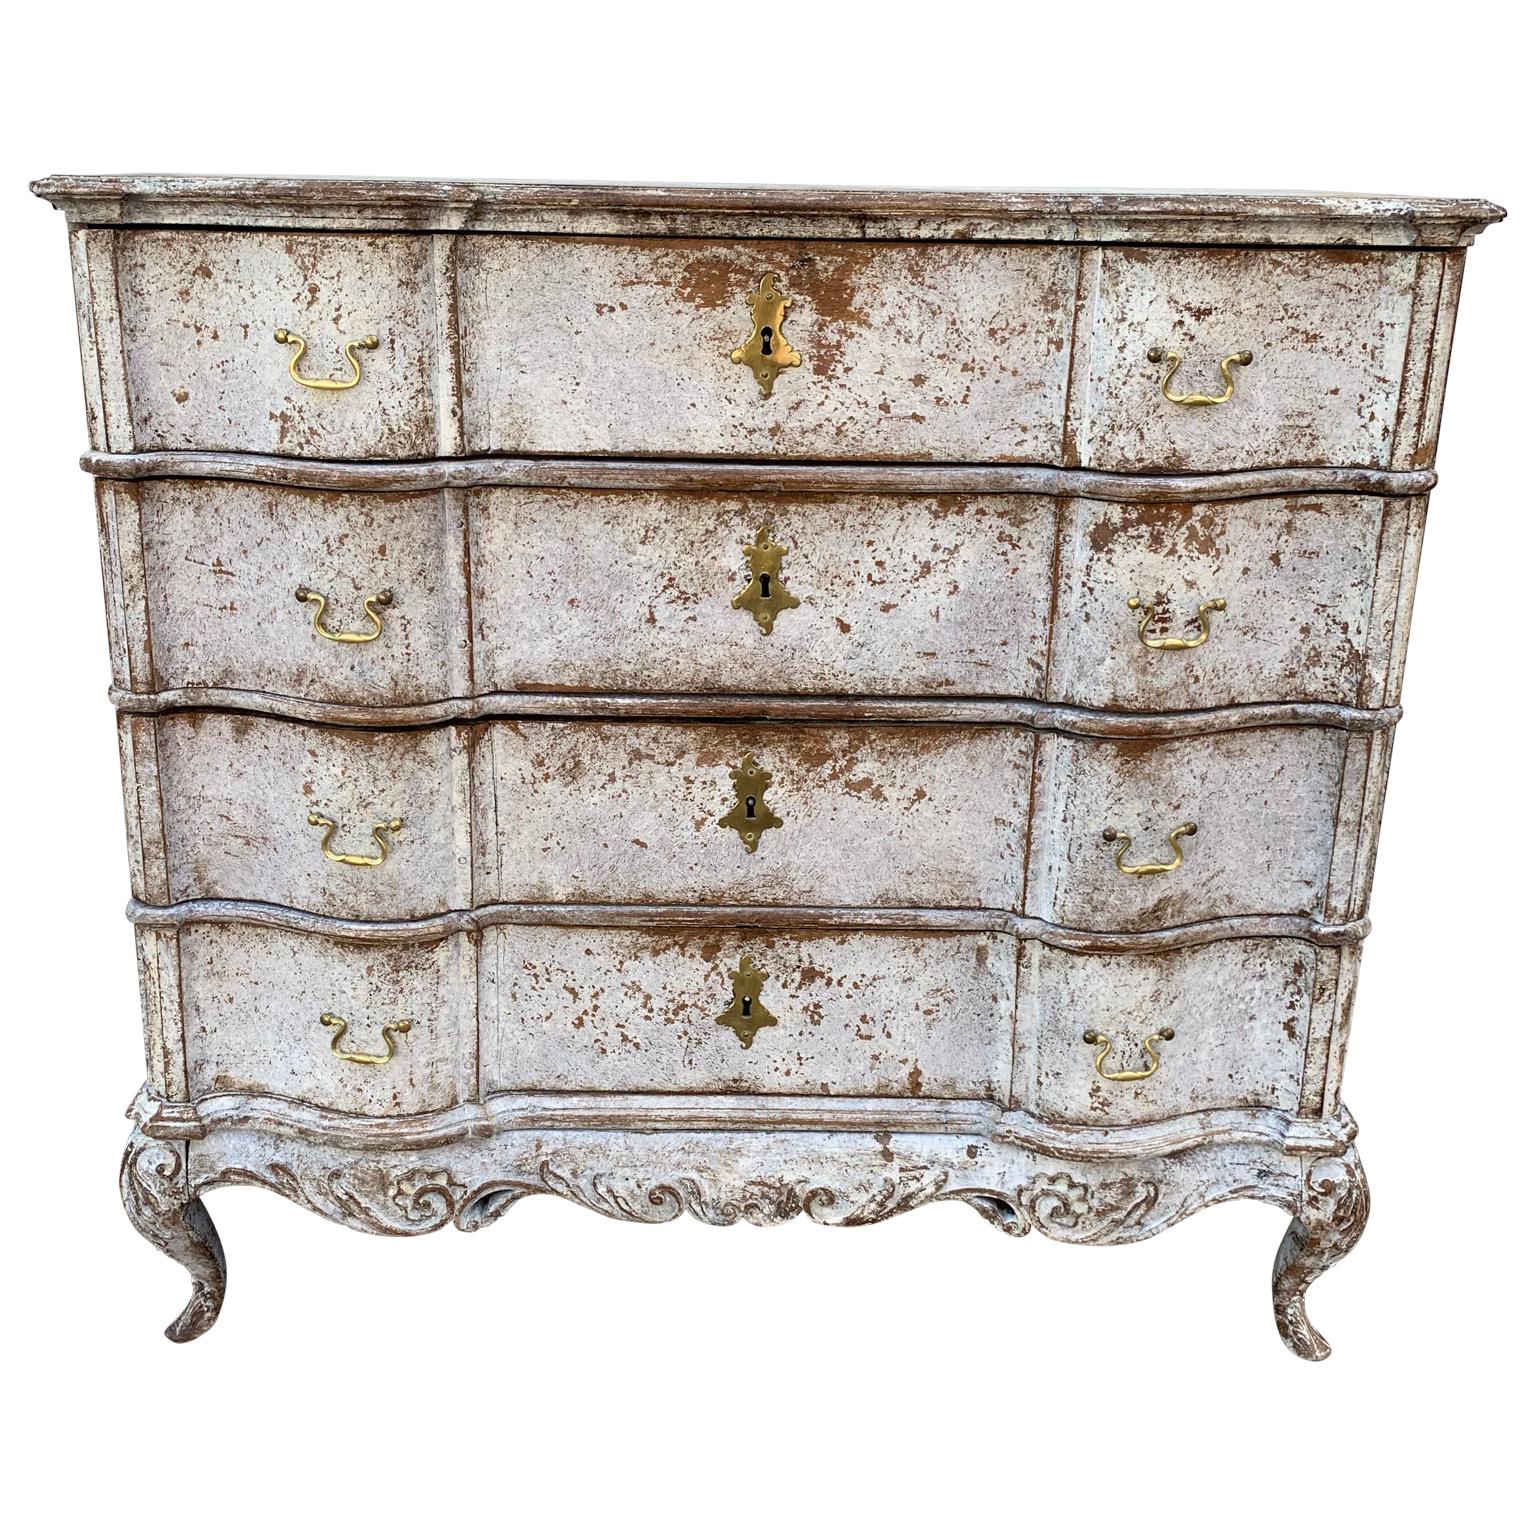 19th century Scandinavian painted baroque chest of drawers

Fine quality solid oak chest of drawers, circa 1840.

The chest has 4-drawer and the original hardware on the drawers and side handles. The original brass back plate on the drawer handles